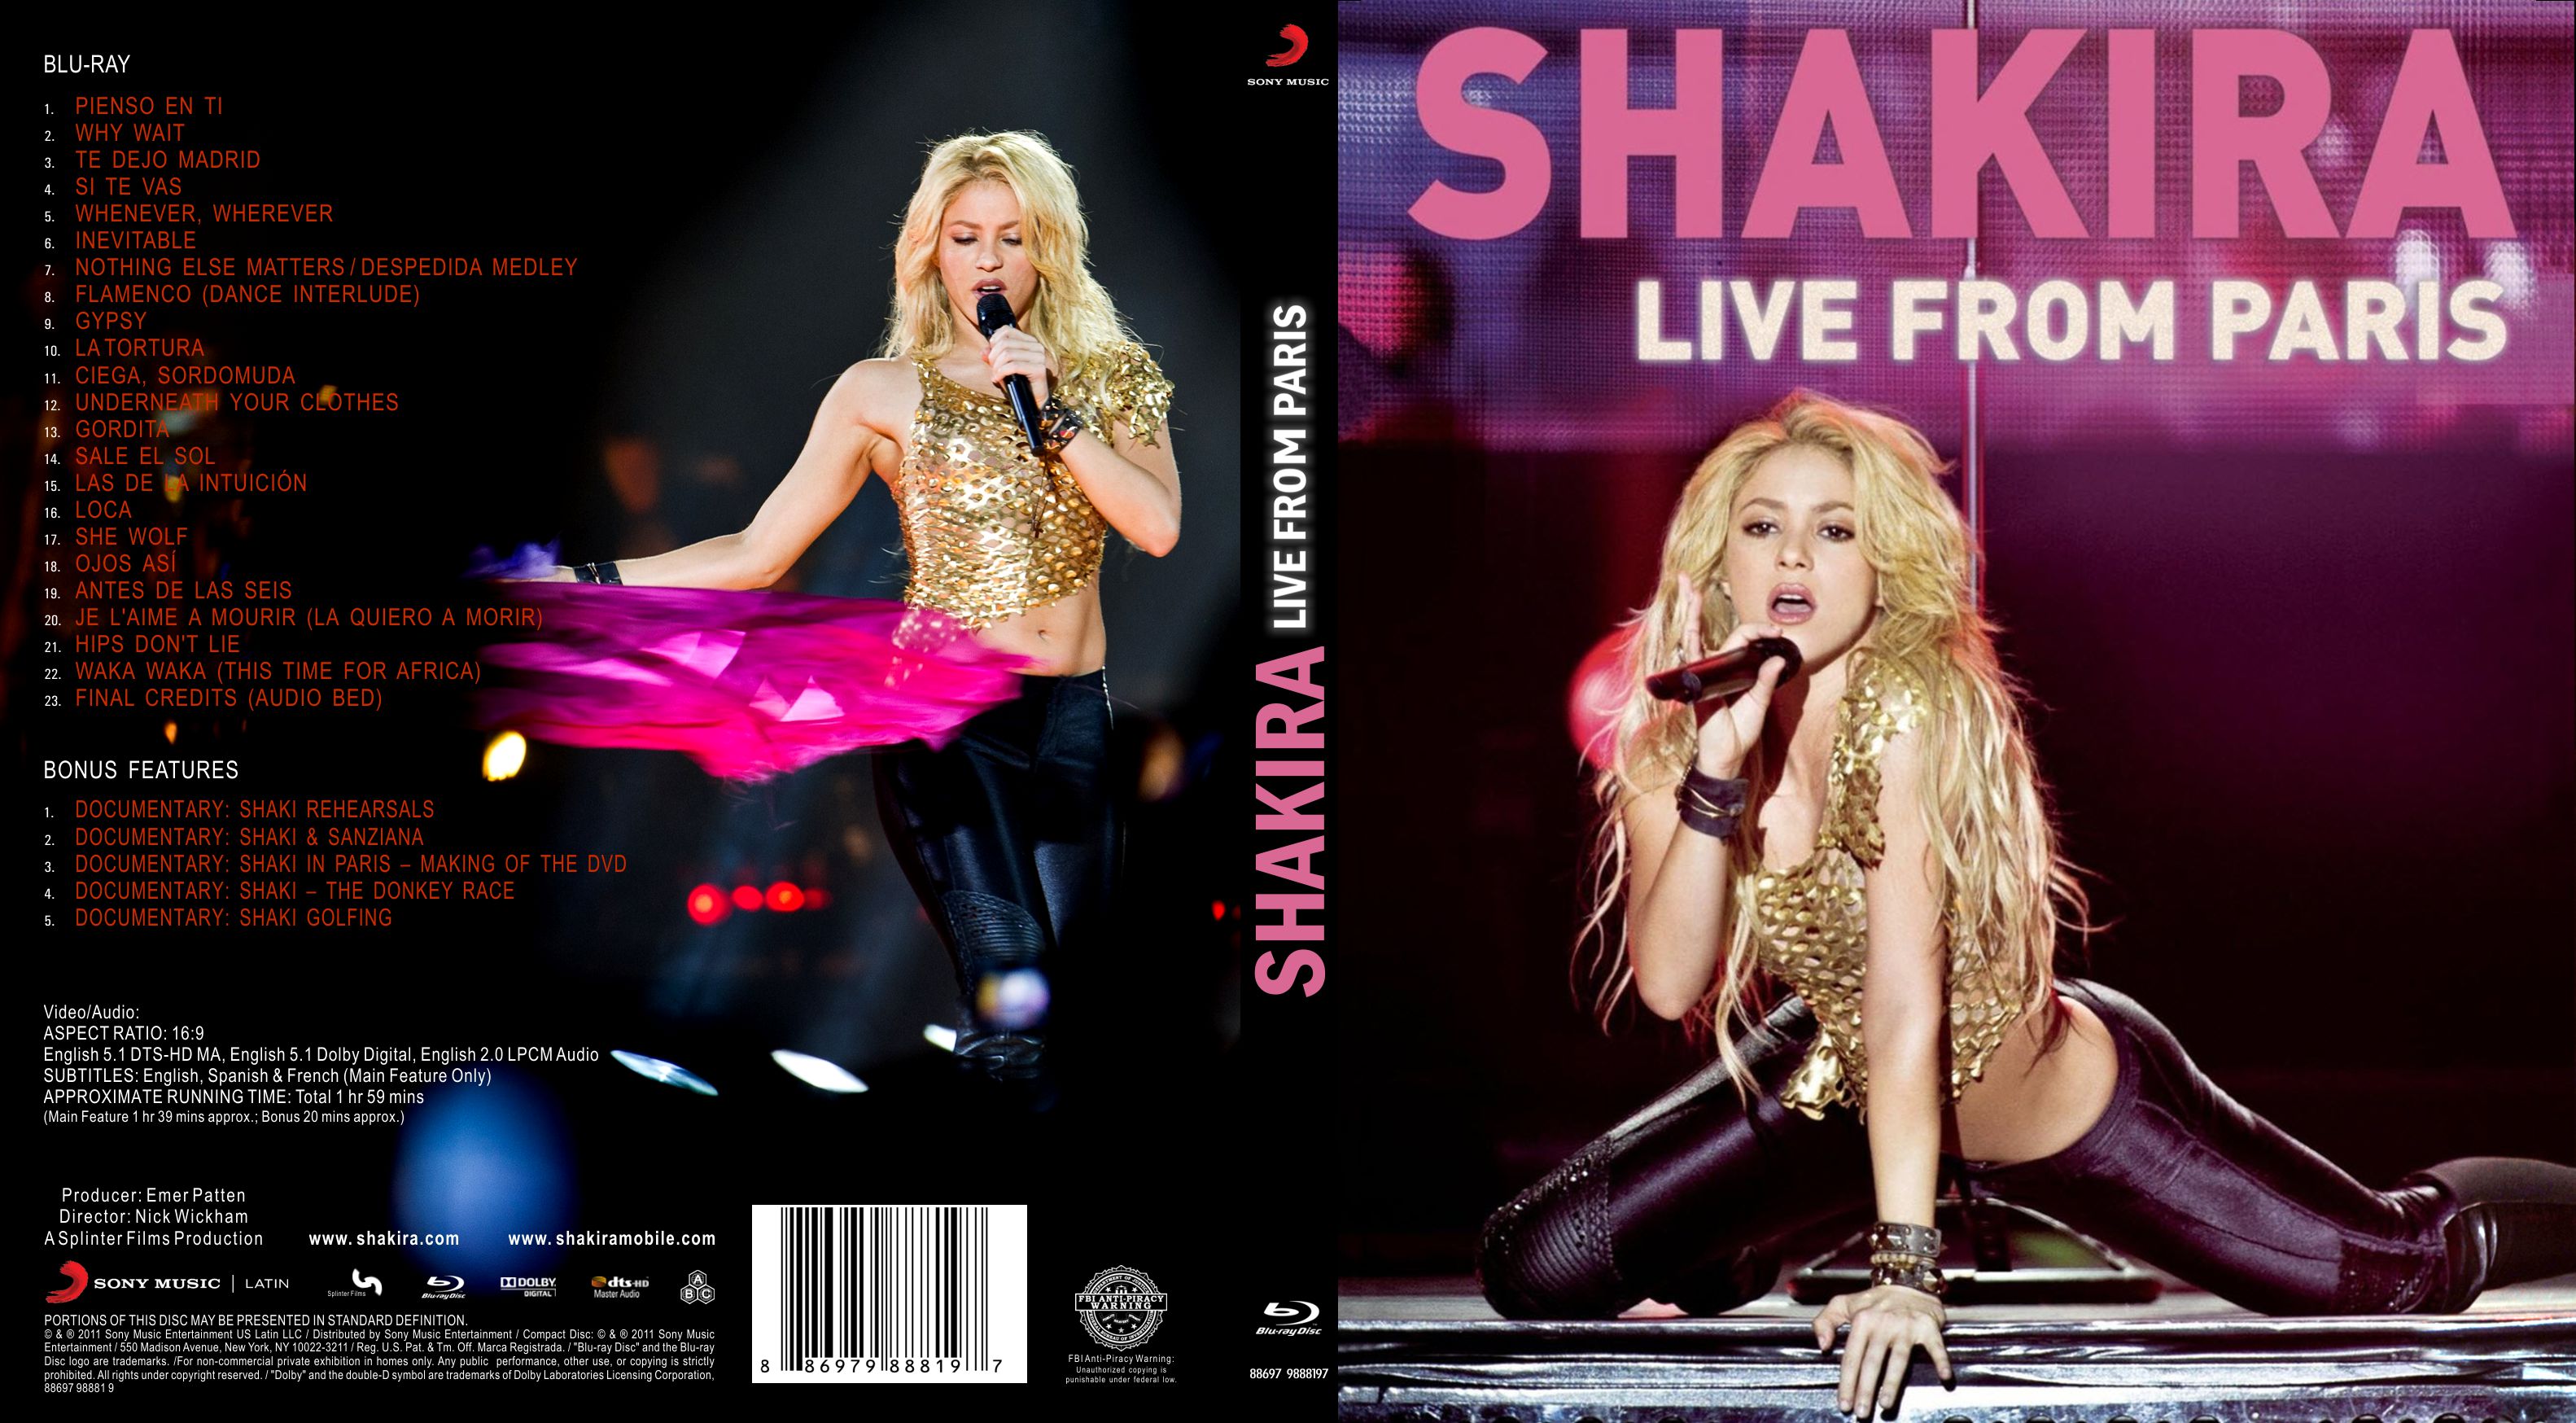 Jaquette DVD Shakira Live From Paris 2011 (BLU-RAY)